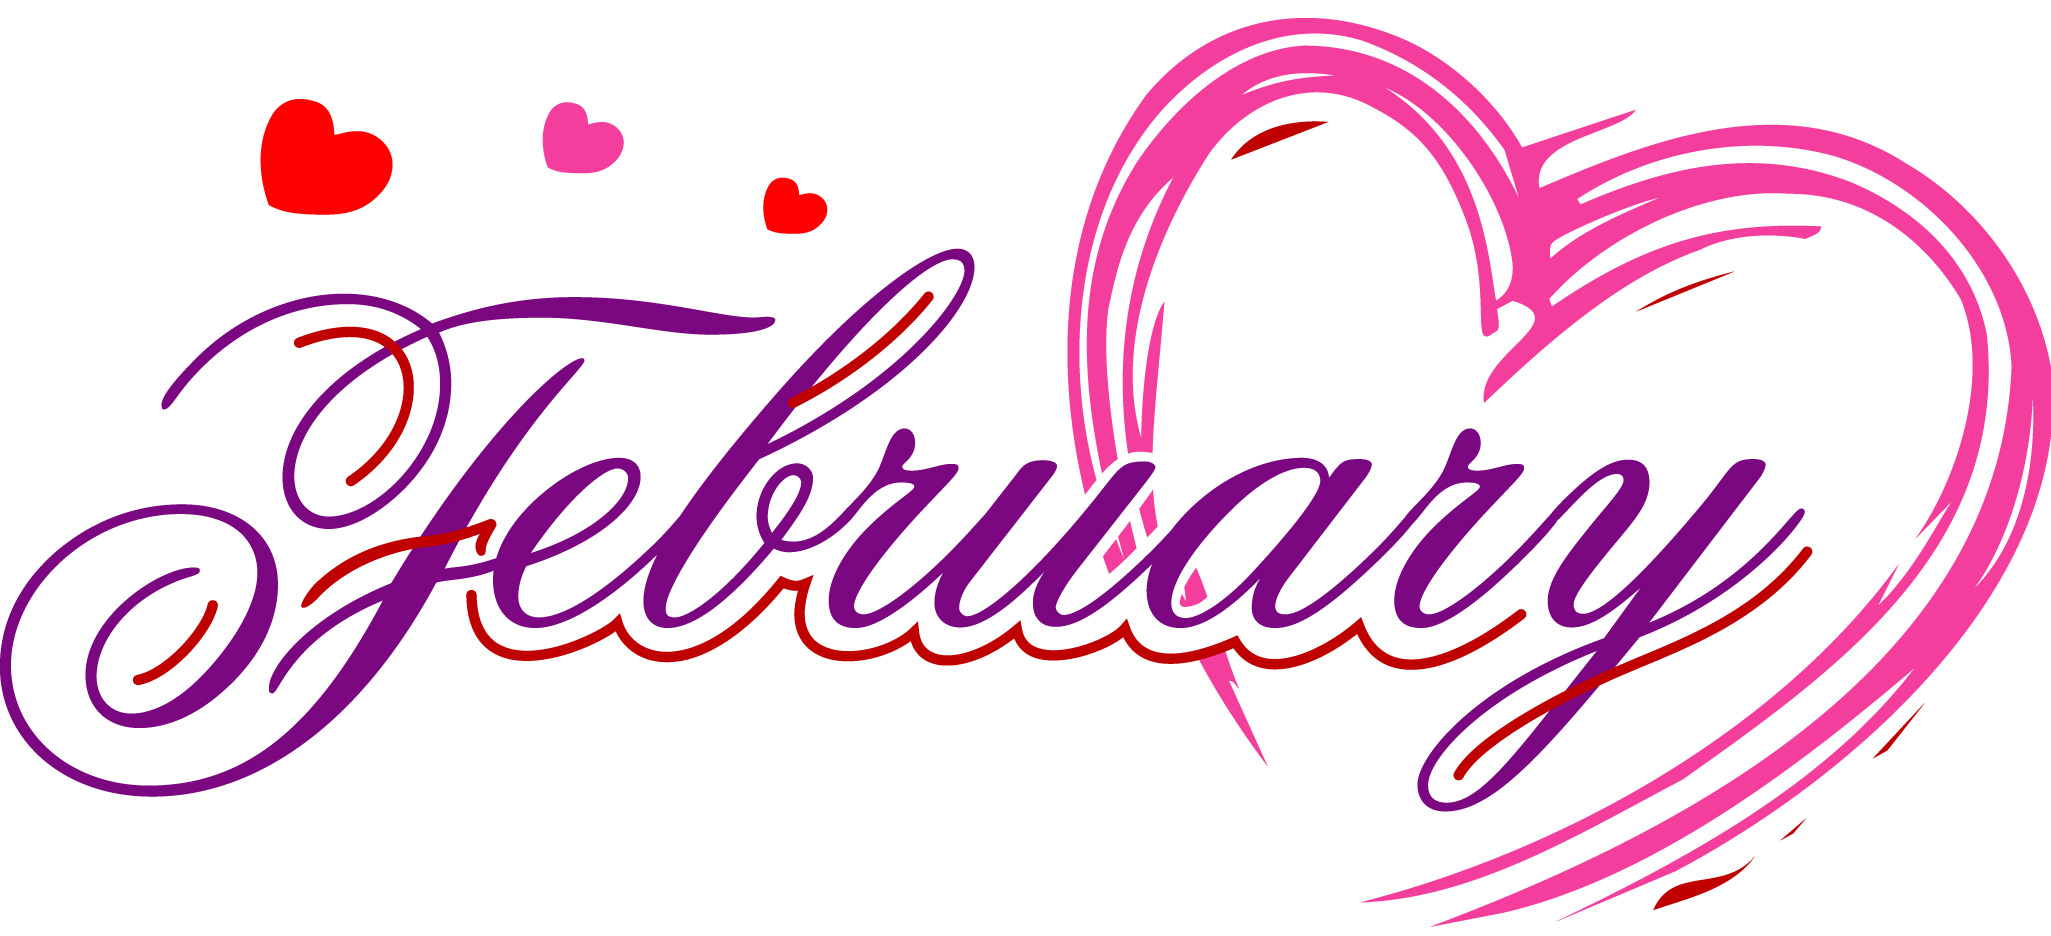 Download February clipart word, February word Transparent FREE for ...